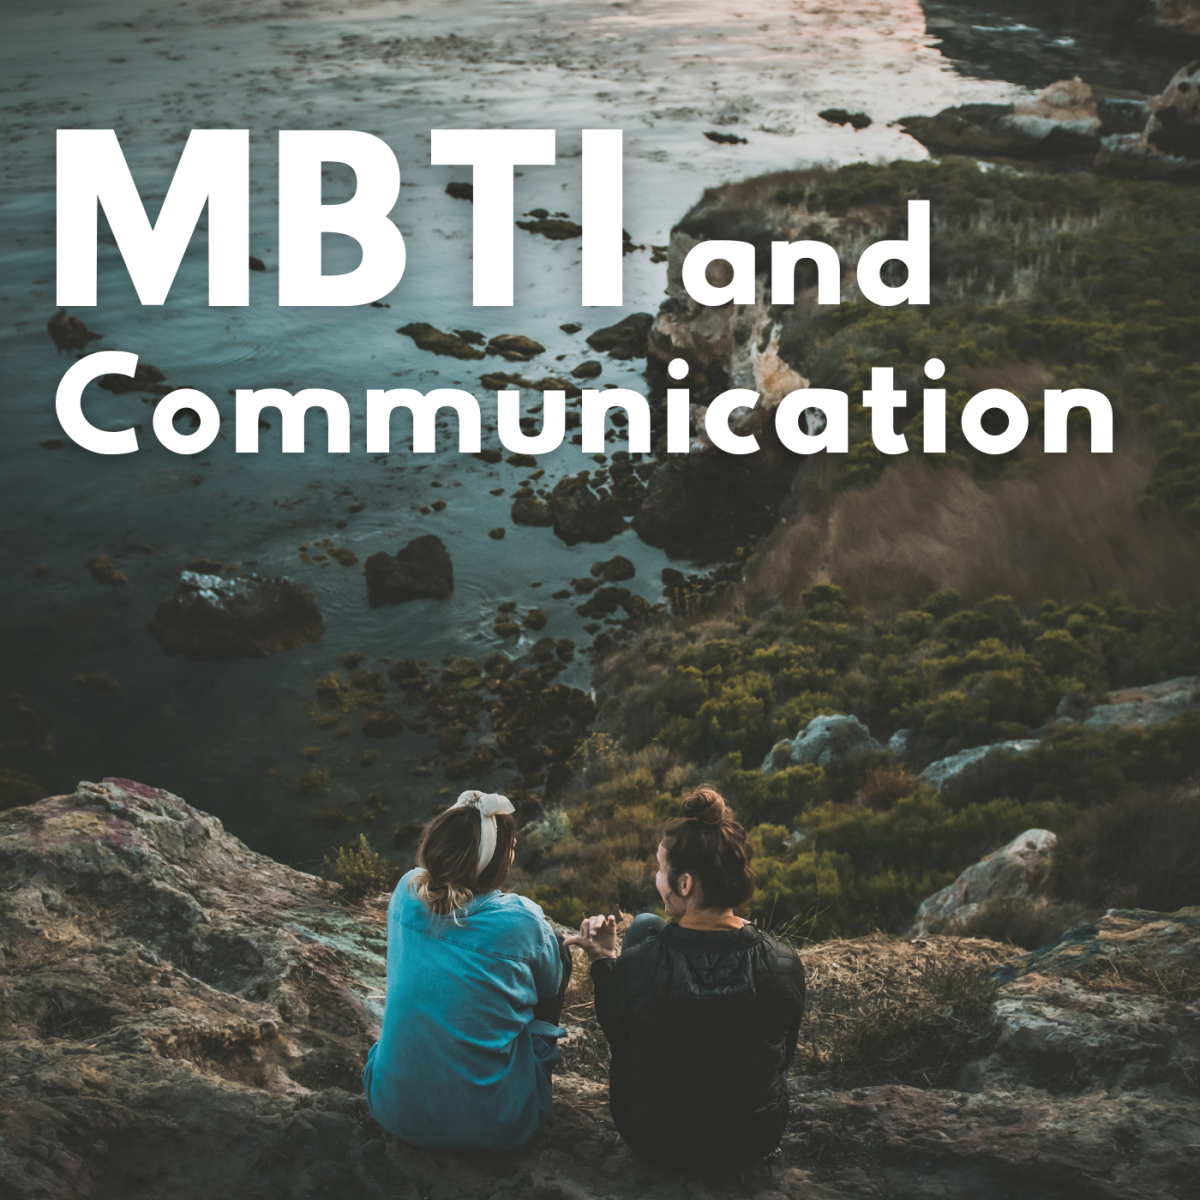 Discover how a person's Myers-Briggs type can influence their communication in relationships.